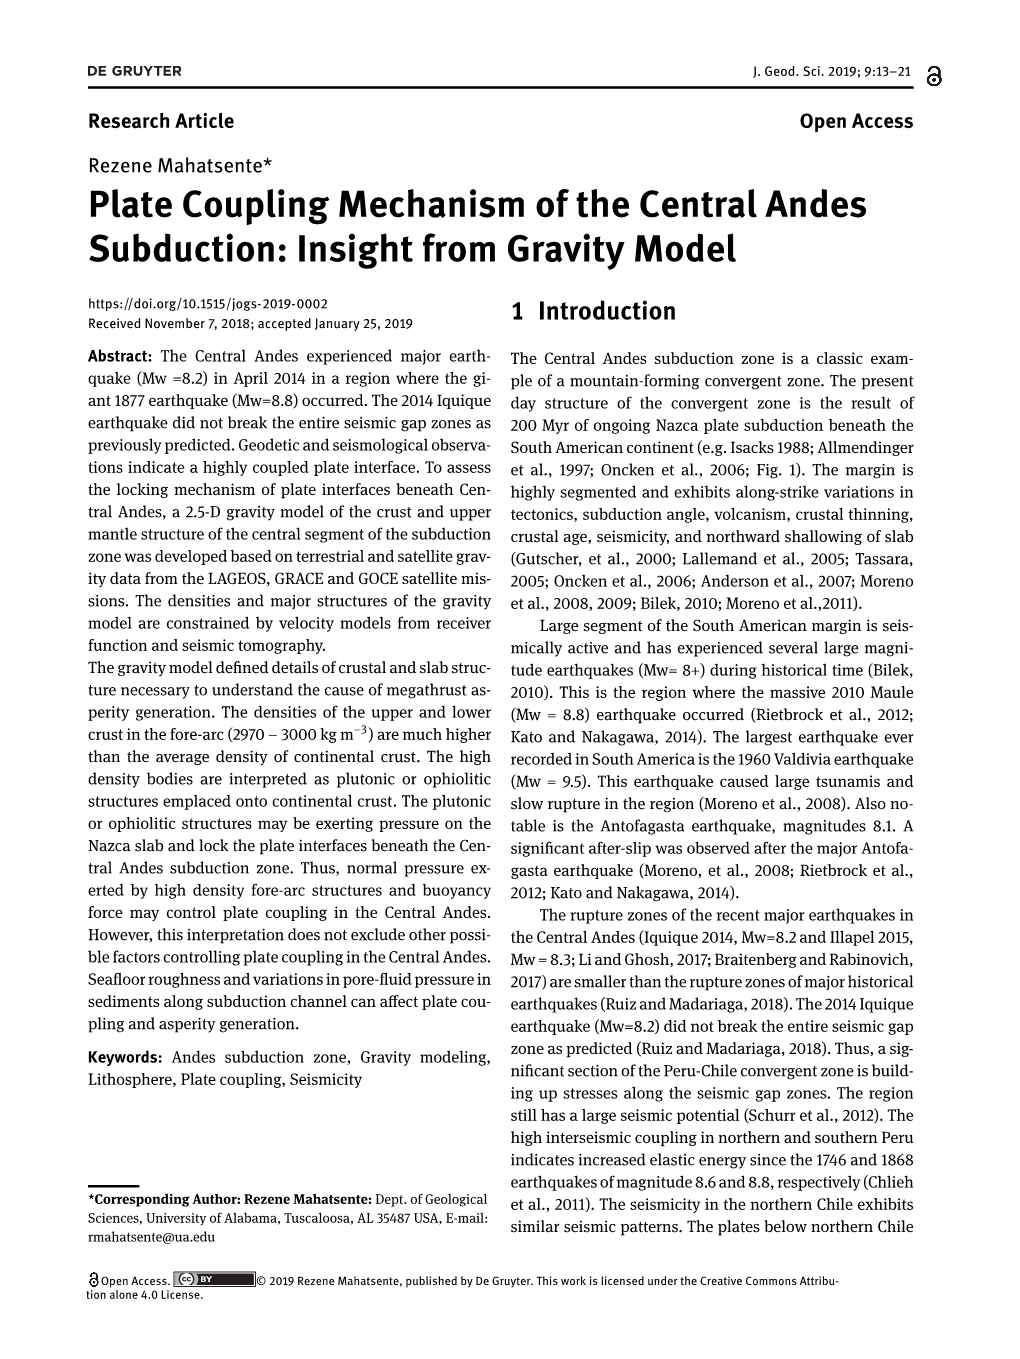 Plate Coupling Mechanism of the Central Andes